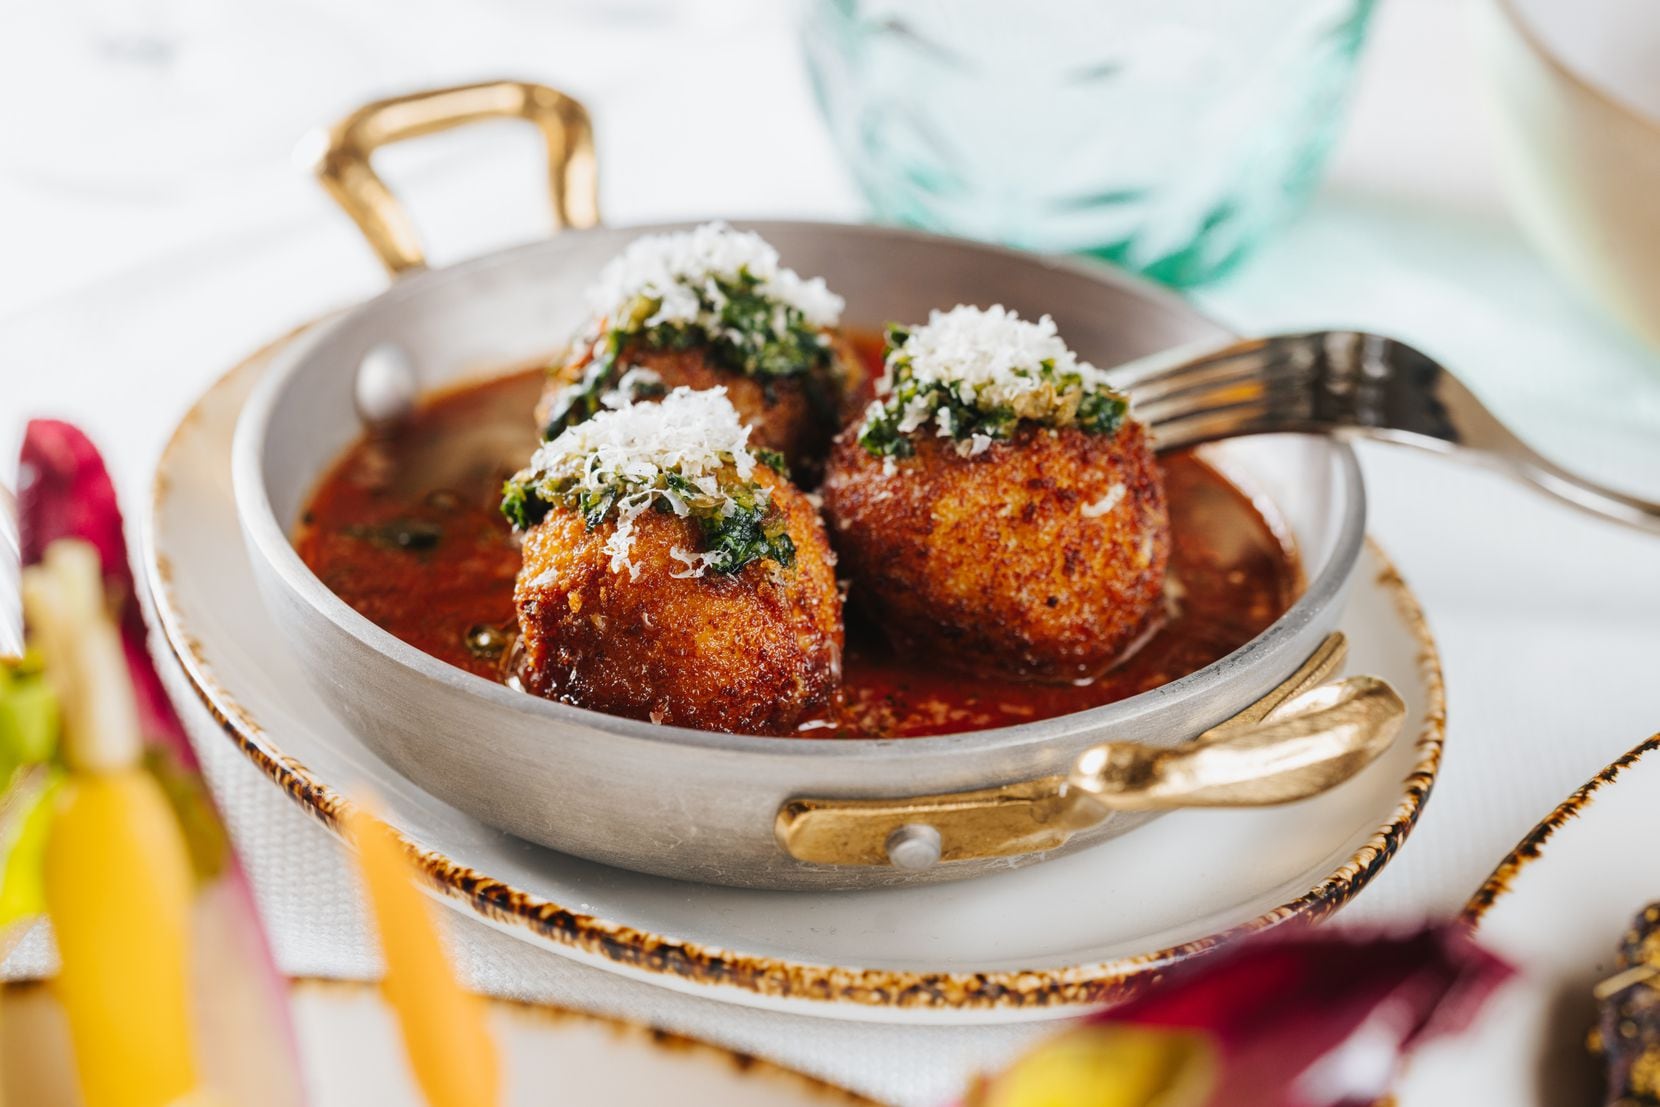 The arancini at 61 Osteria in Fort Worth is a blend of fontina cheese and rice, fried and...